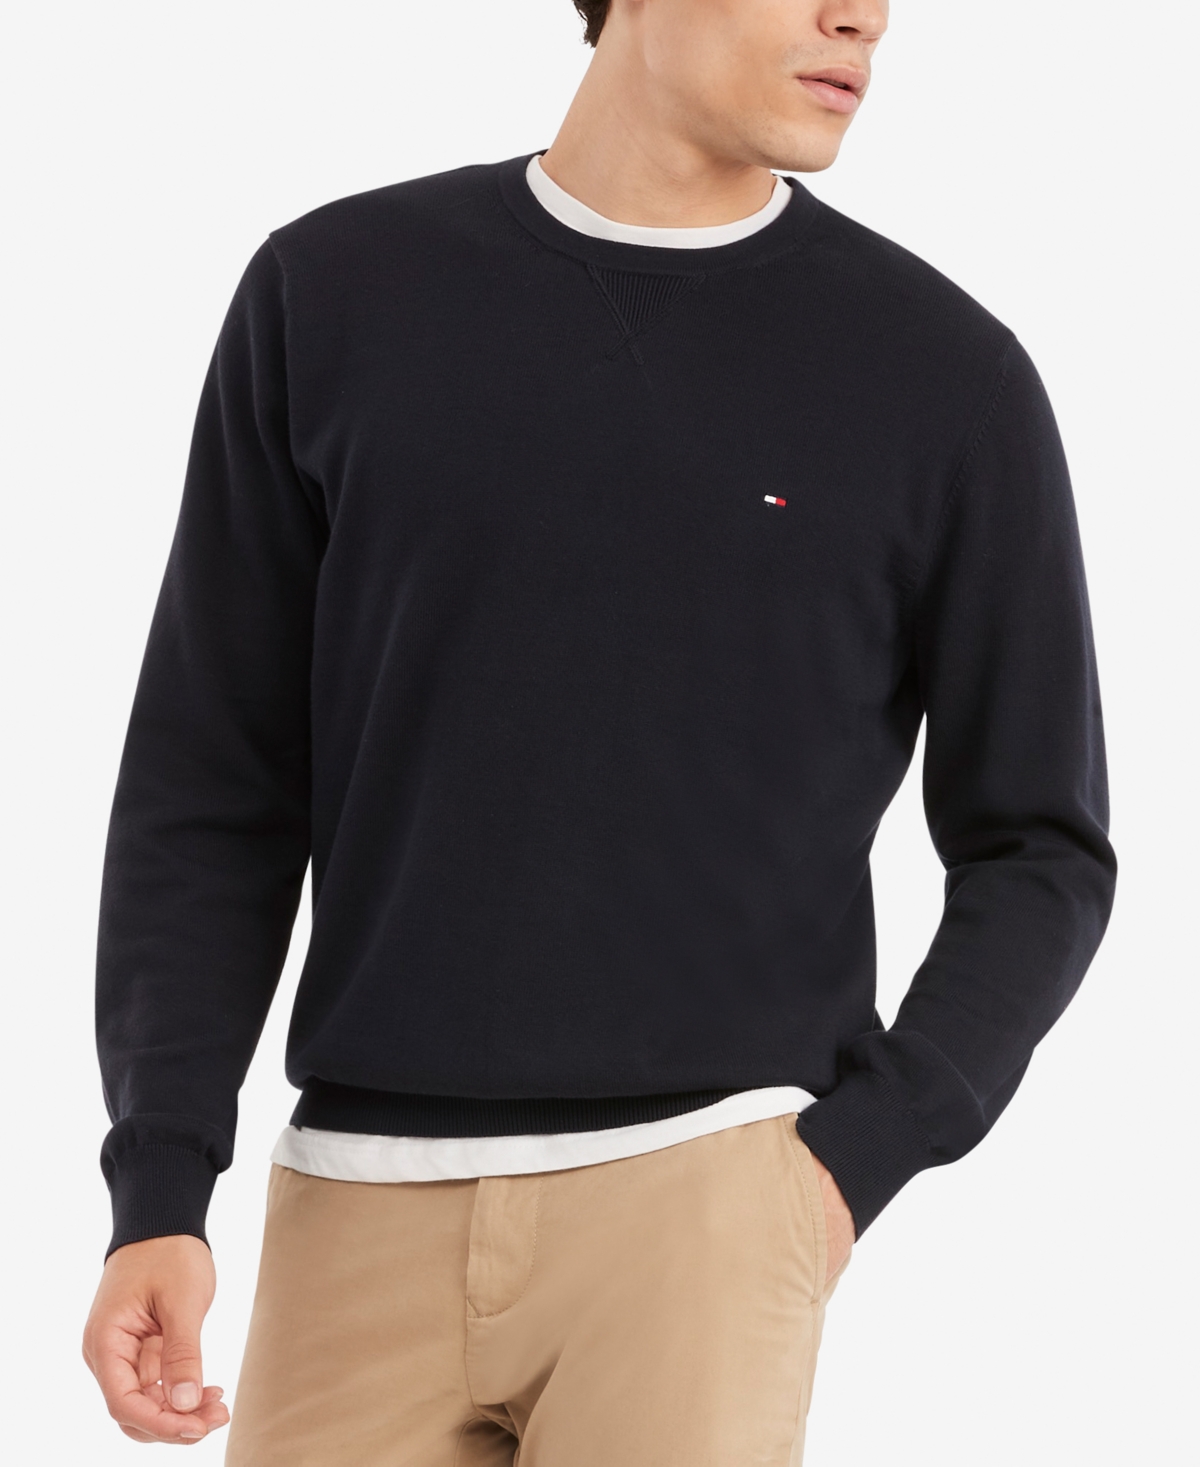 Tommy Hilfiger Men's Signature Solid Crew Neck Sweater